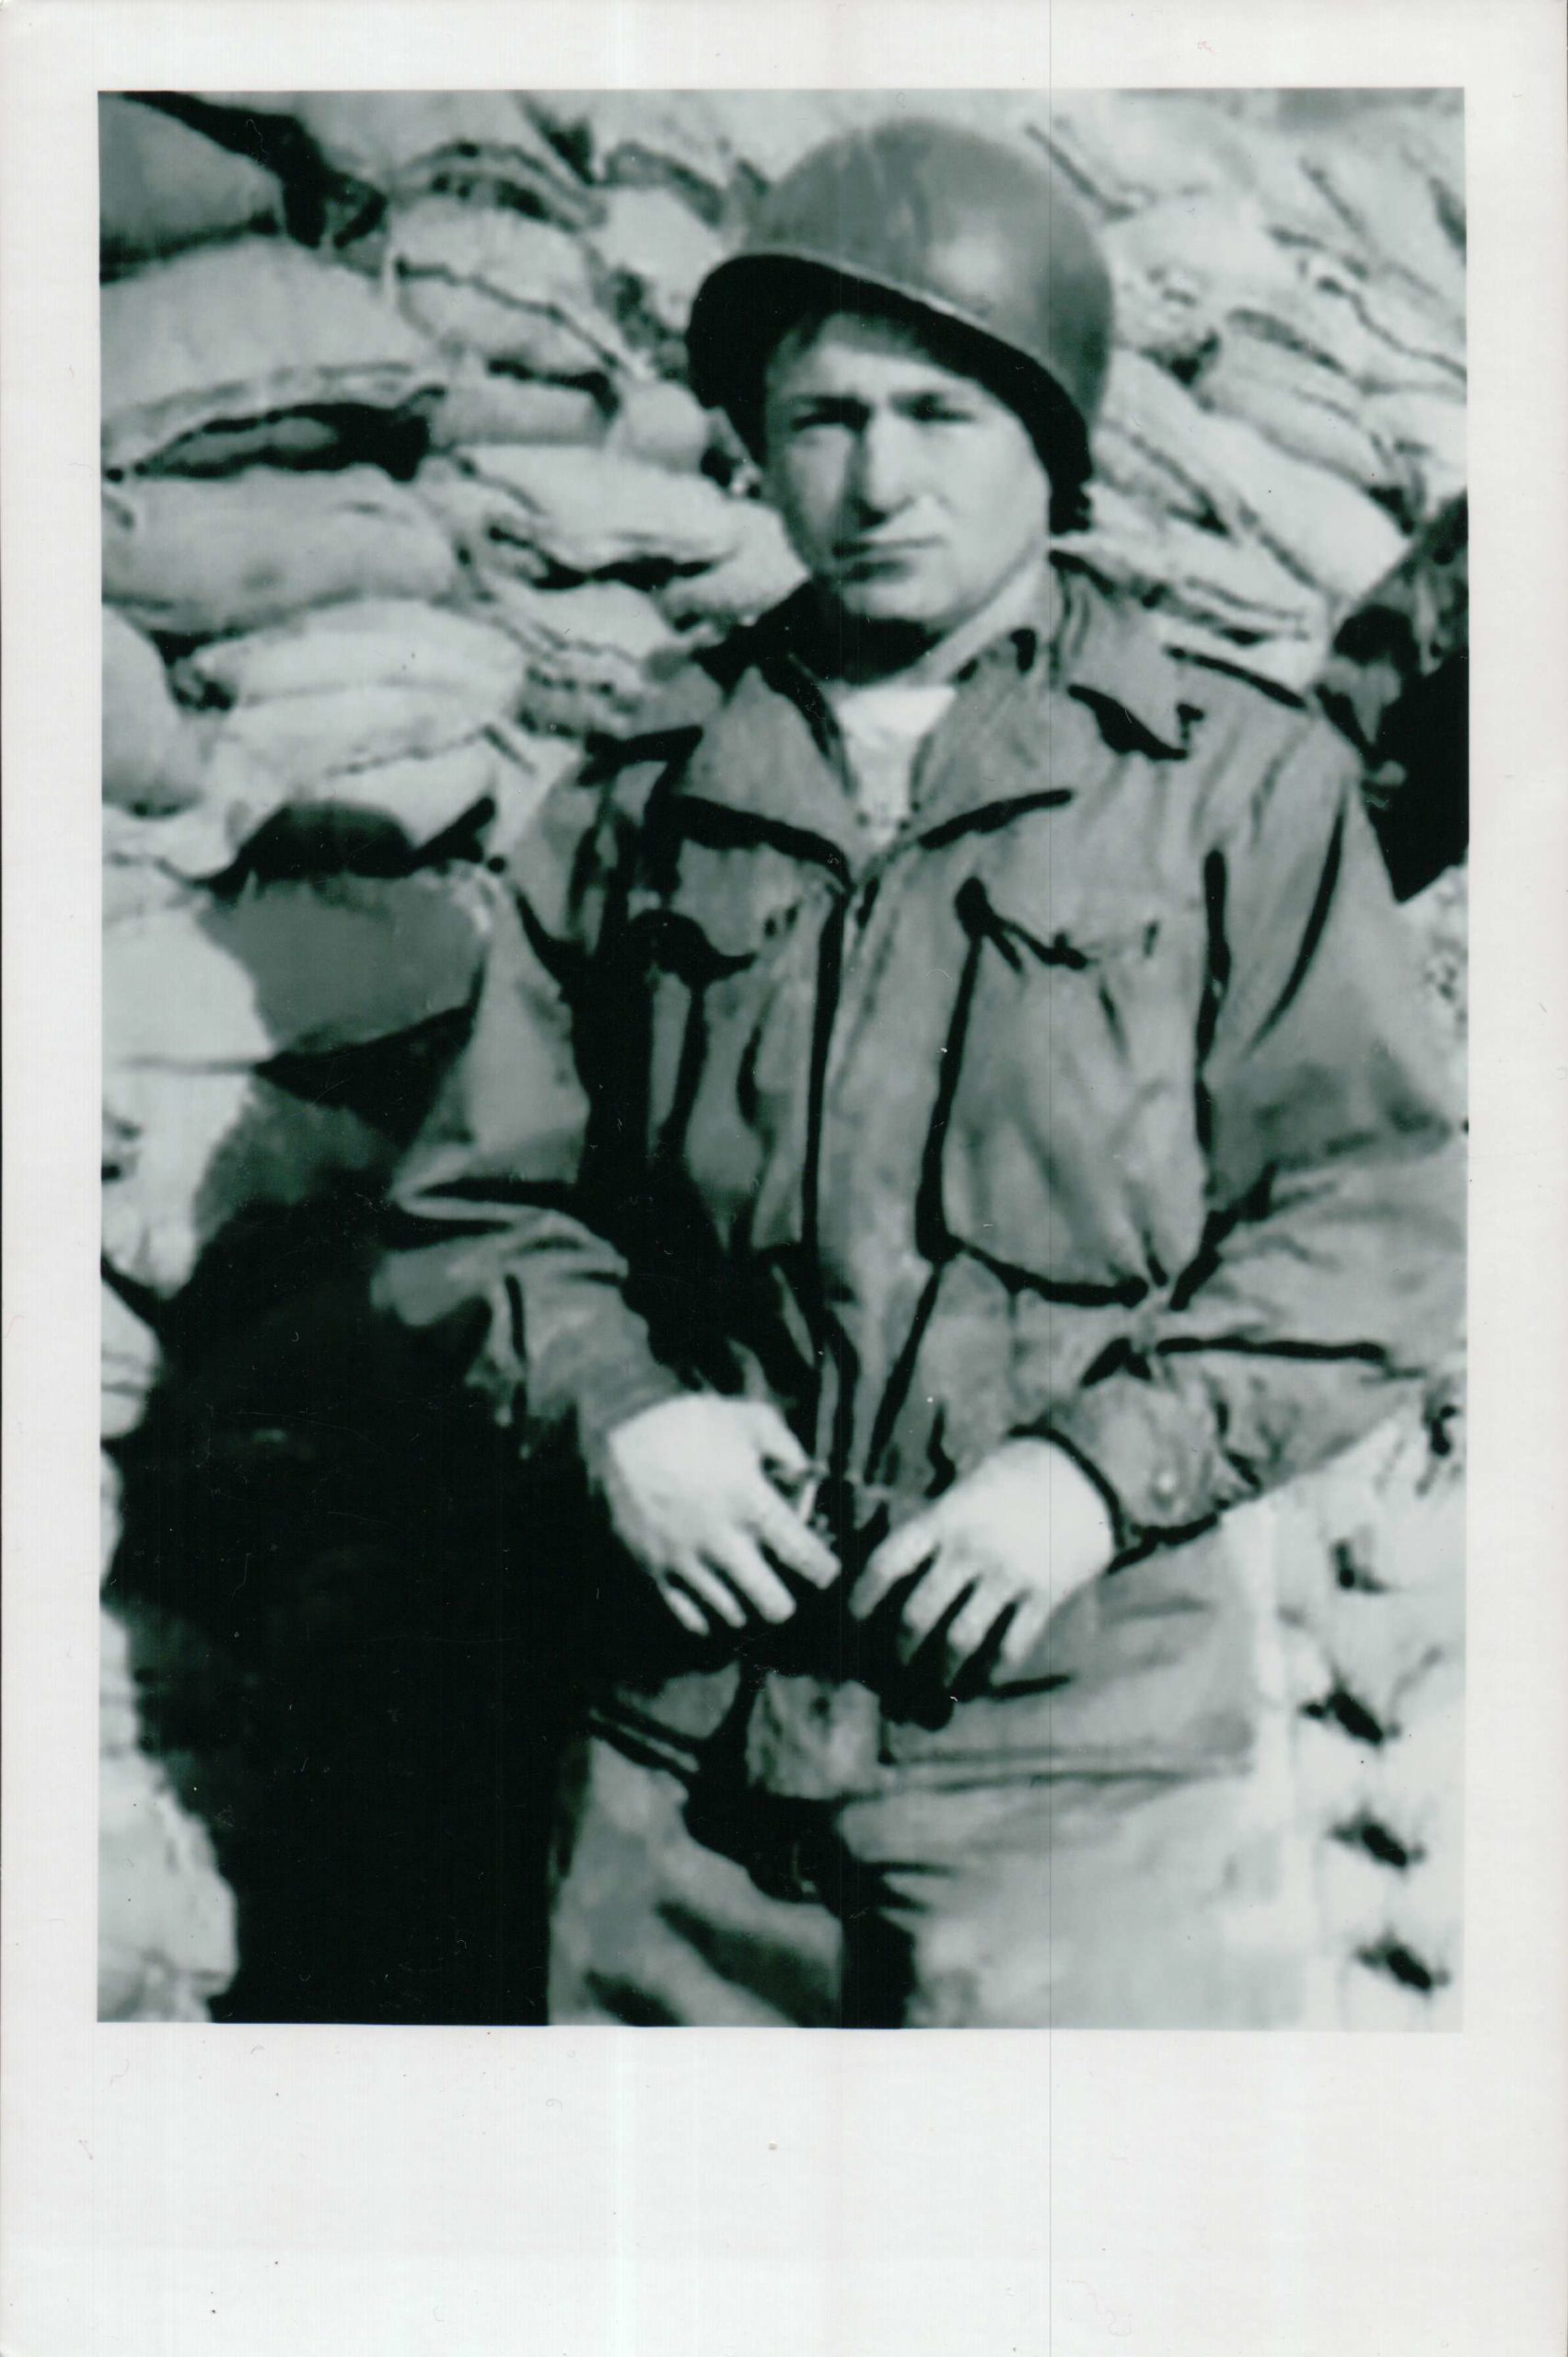 Rosser standing in front of a bunker in Kumhwa Valley in 1951.